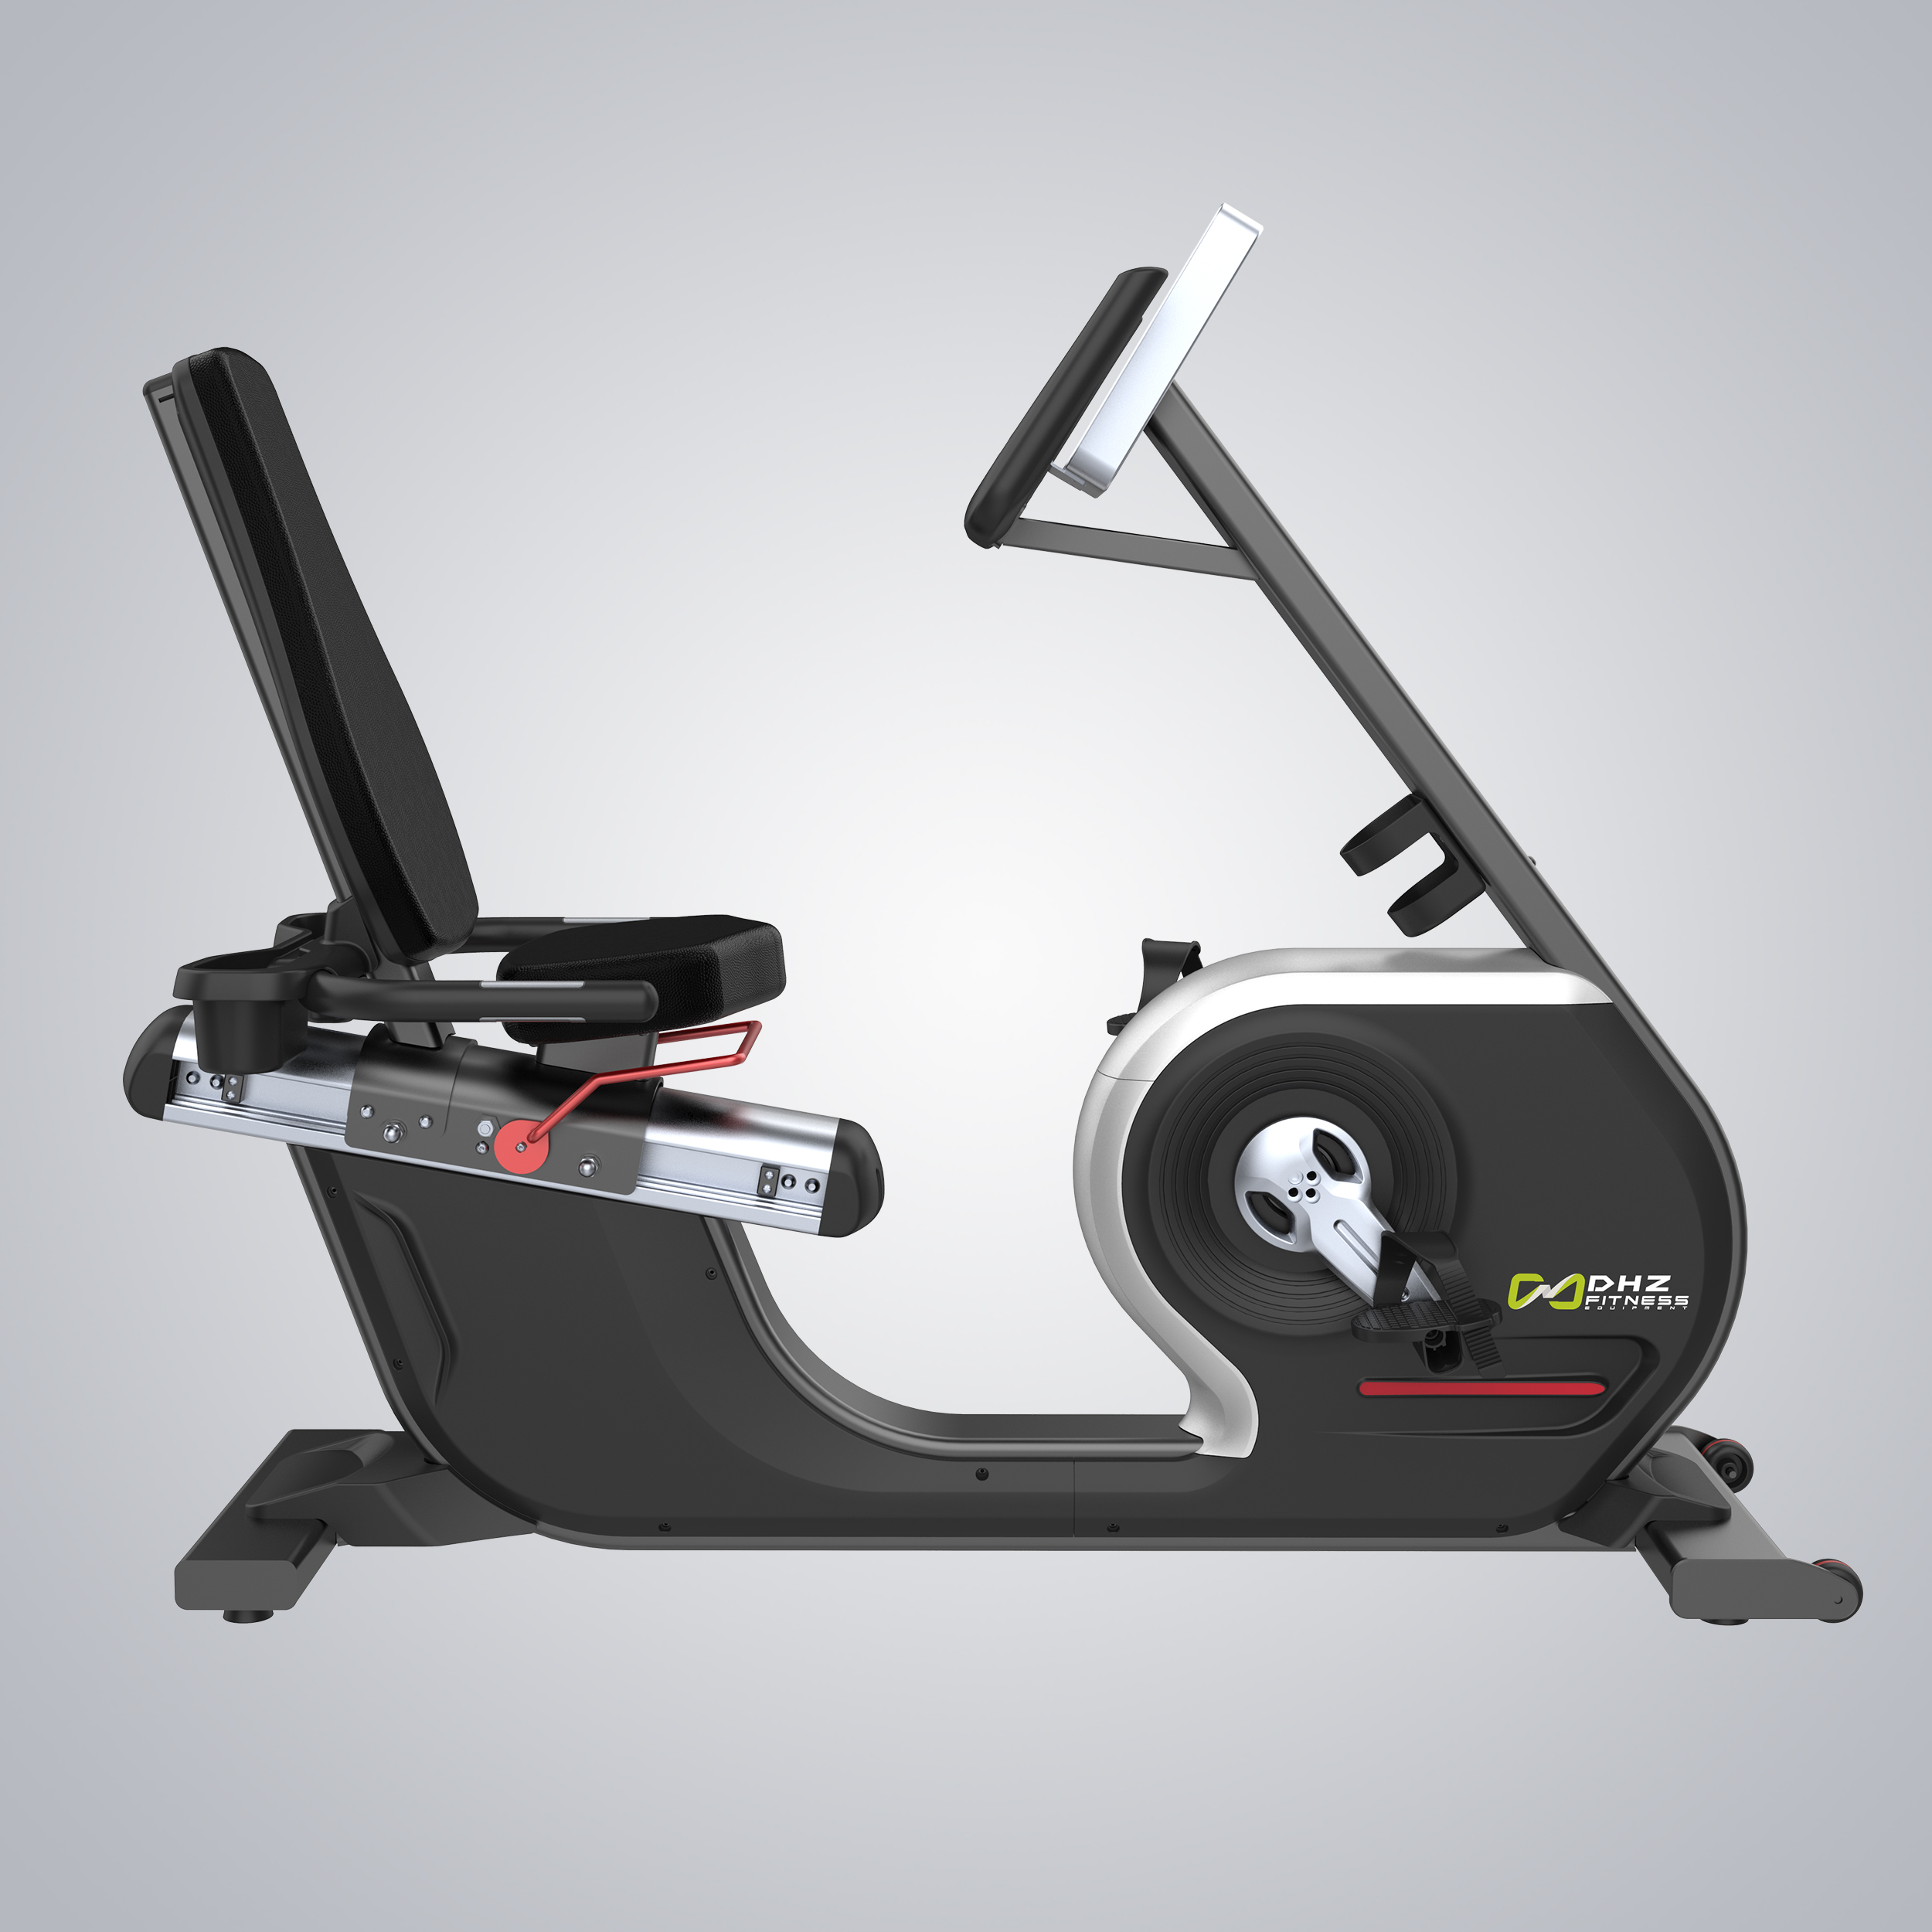 High Quality Commercial Recumbent Bike for Fitness Gym Equipment Elliptical Exercise Machine Home